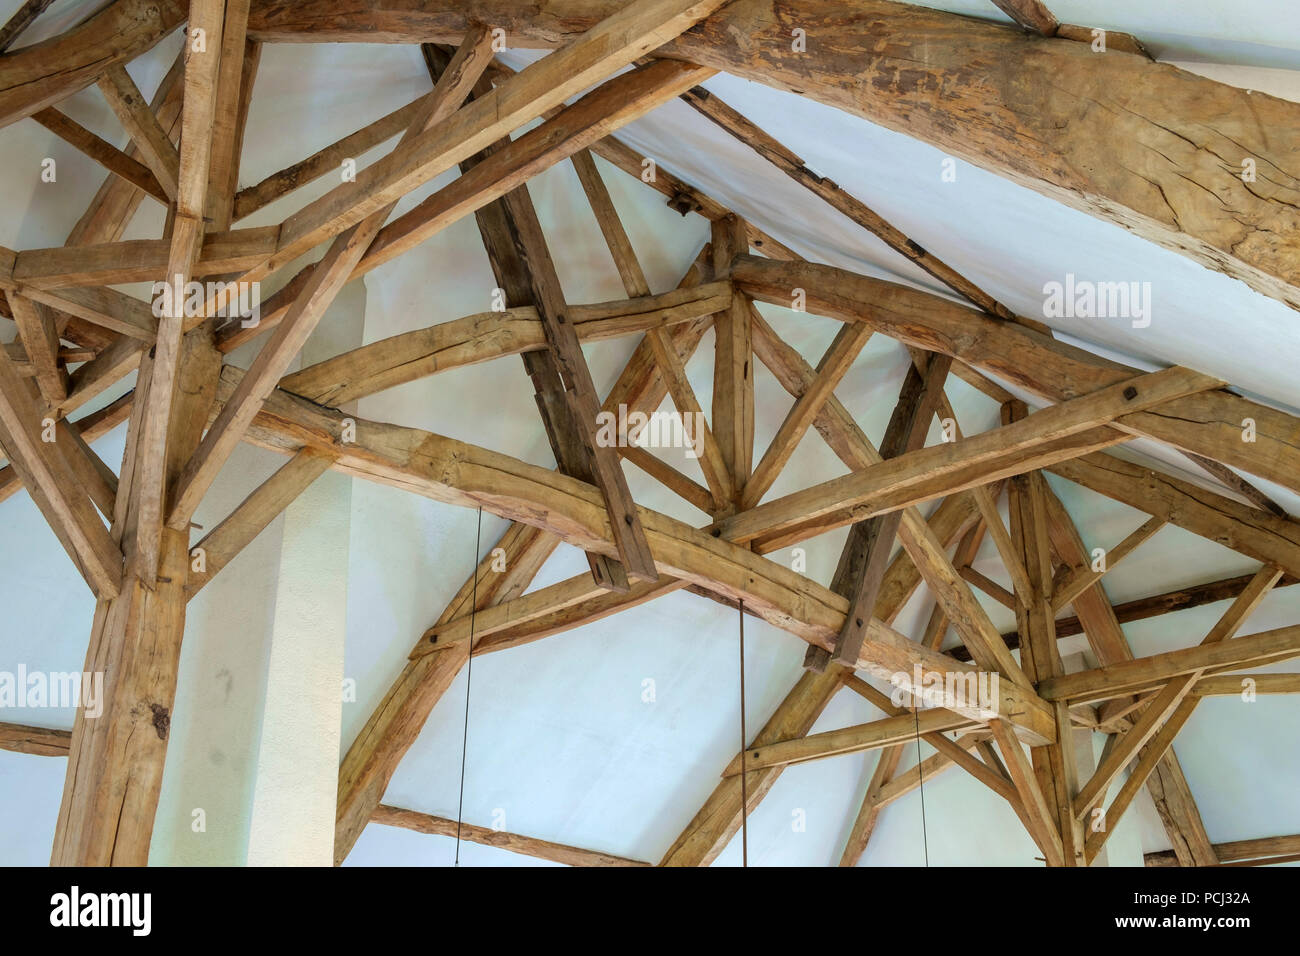 Looking up at the massive restored interior timber roof construction in a large  old French farmhouse Stock Photo